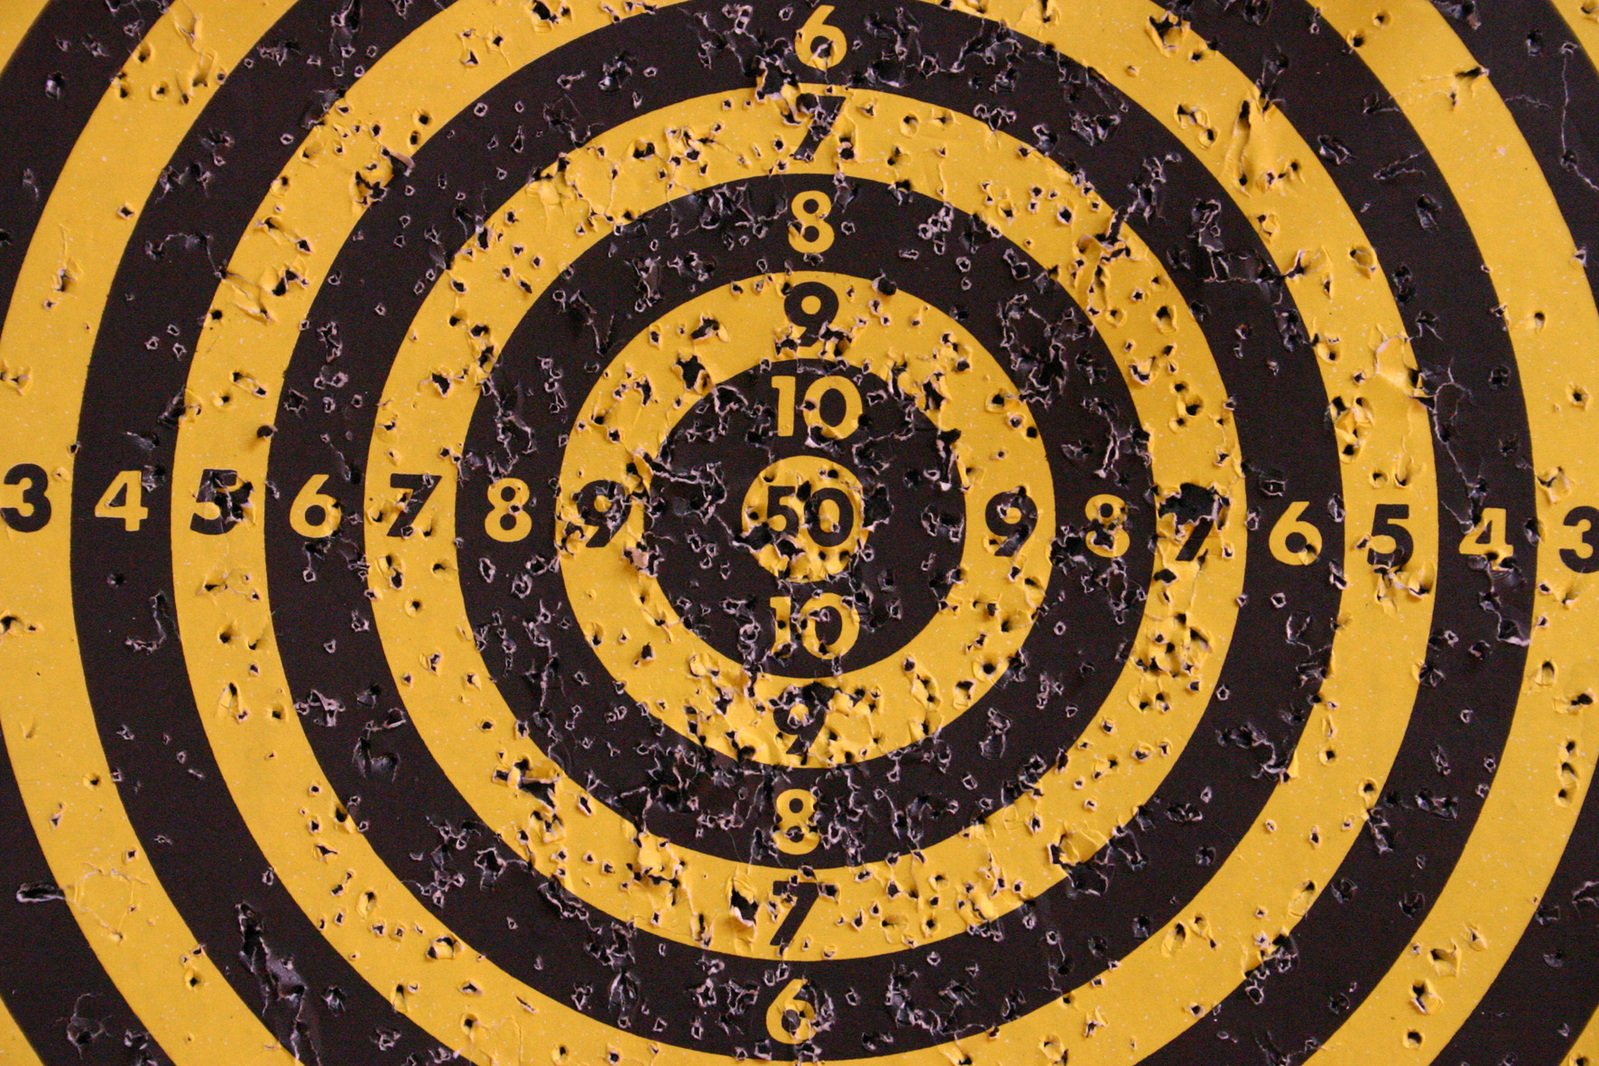 the yellow and black spiral pattern has numbers on it